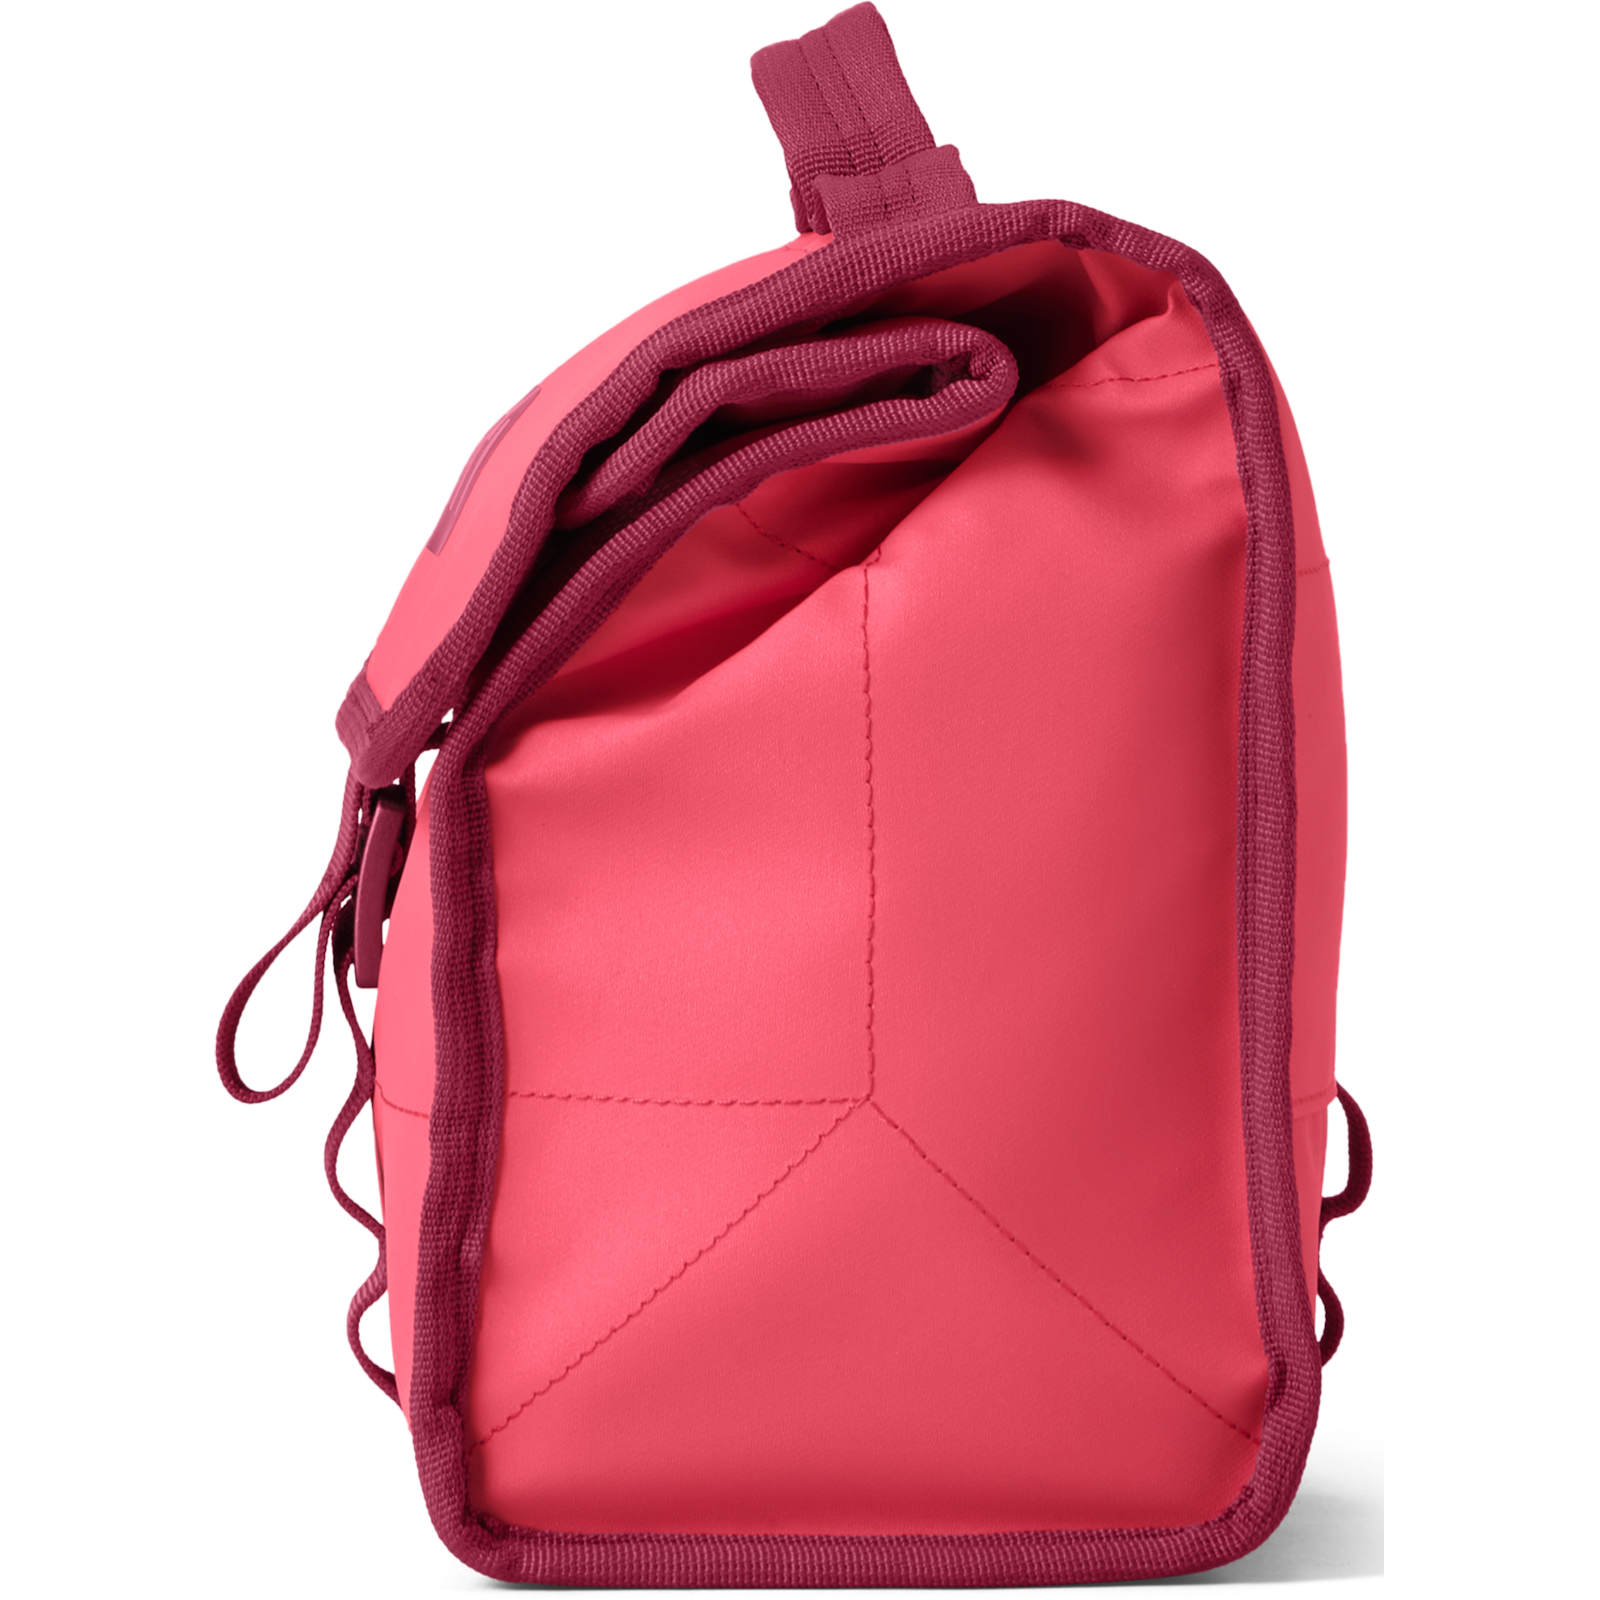 Yeti Day Trip Bimini Pink Lunch Bag Standing Side Angle View